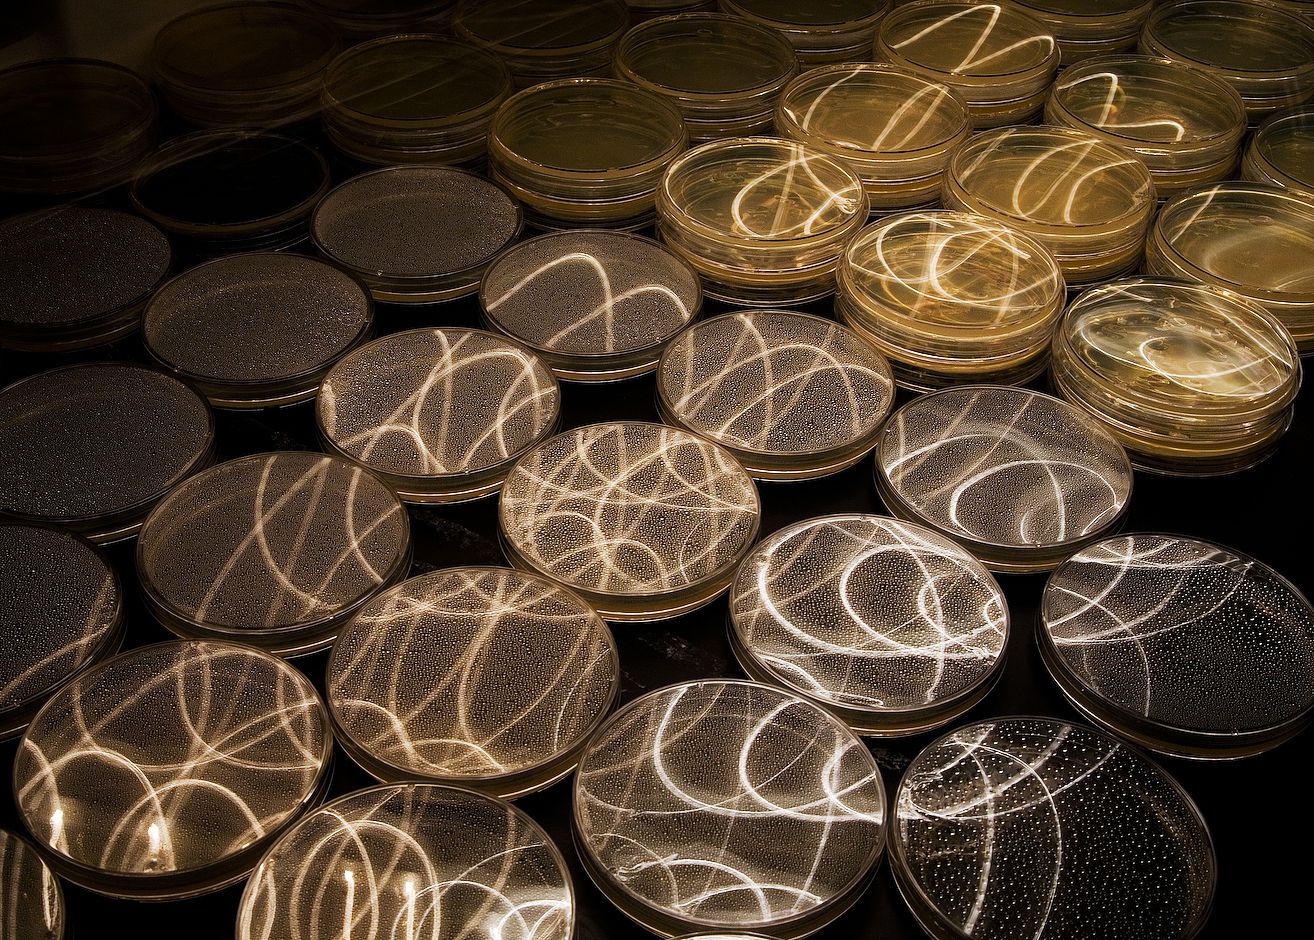 Petri dishes with light patterns reflecting on their lids